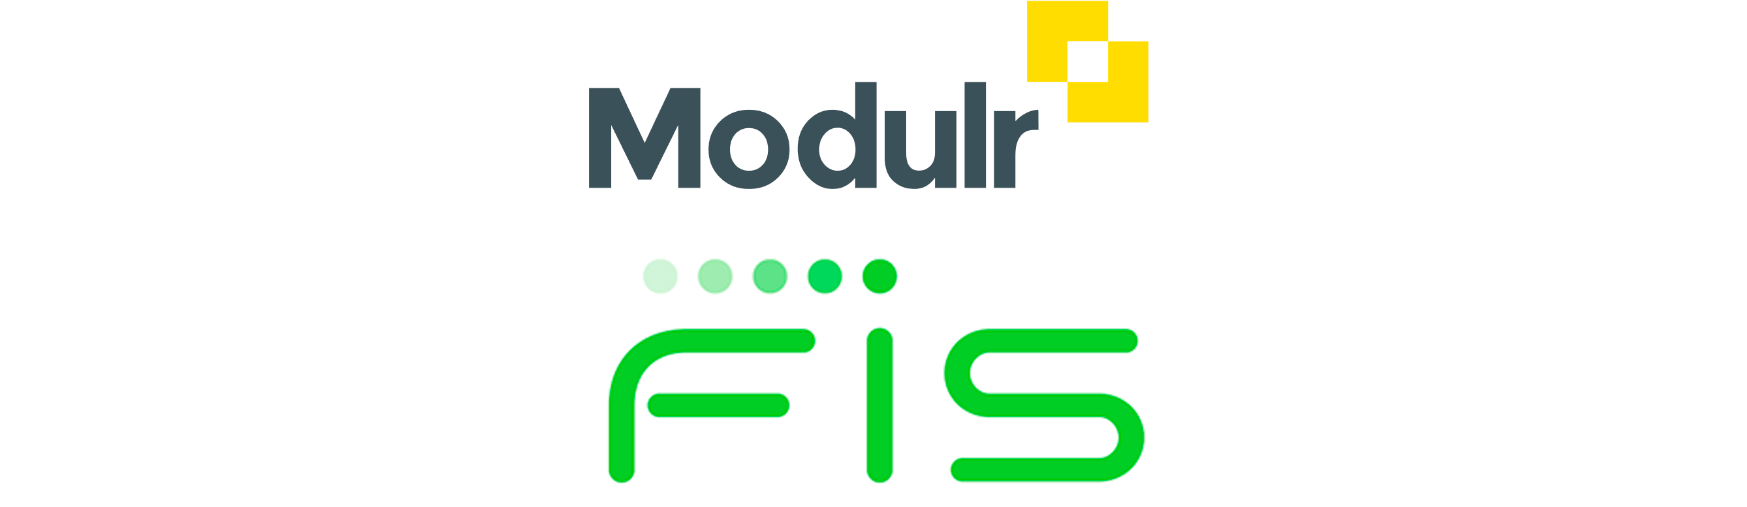 Modulr Receives Strategic Investment from the Venture Arm of FIS